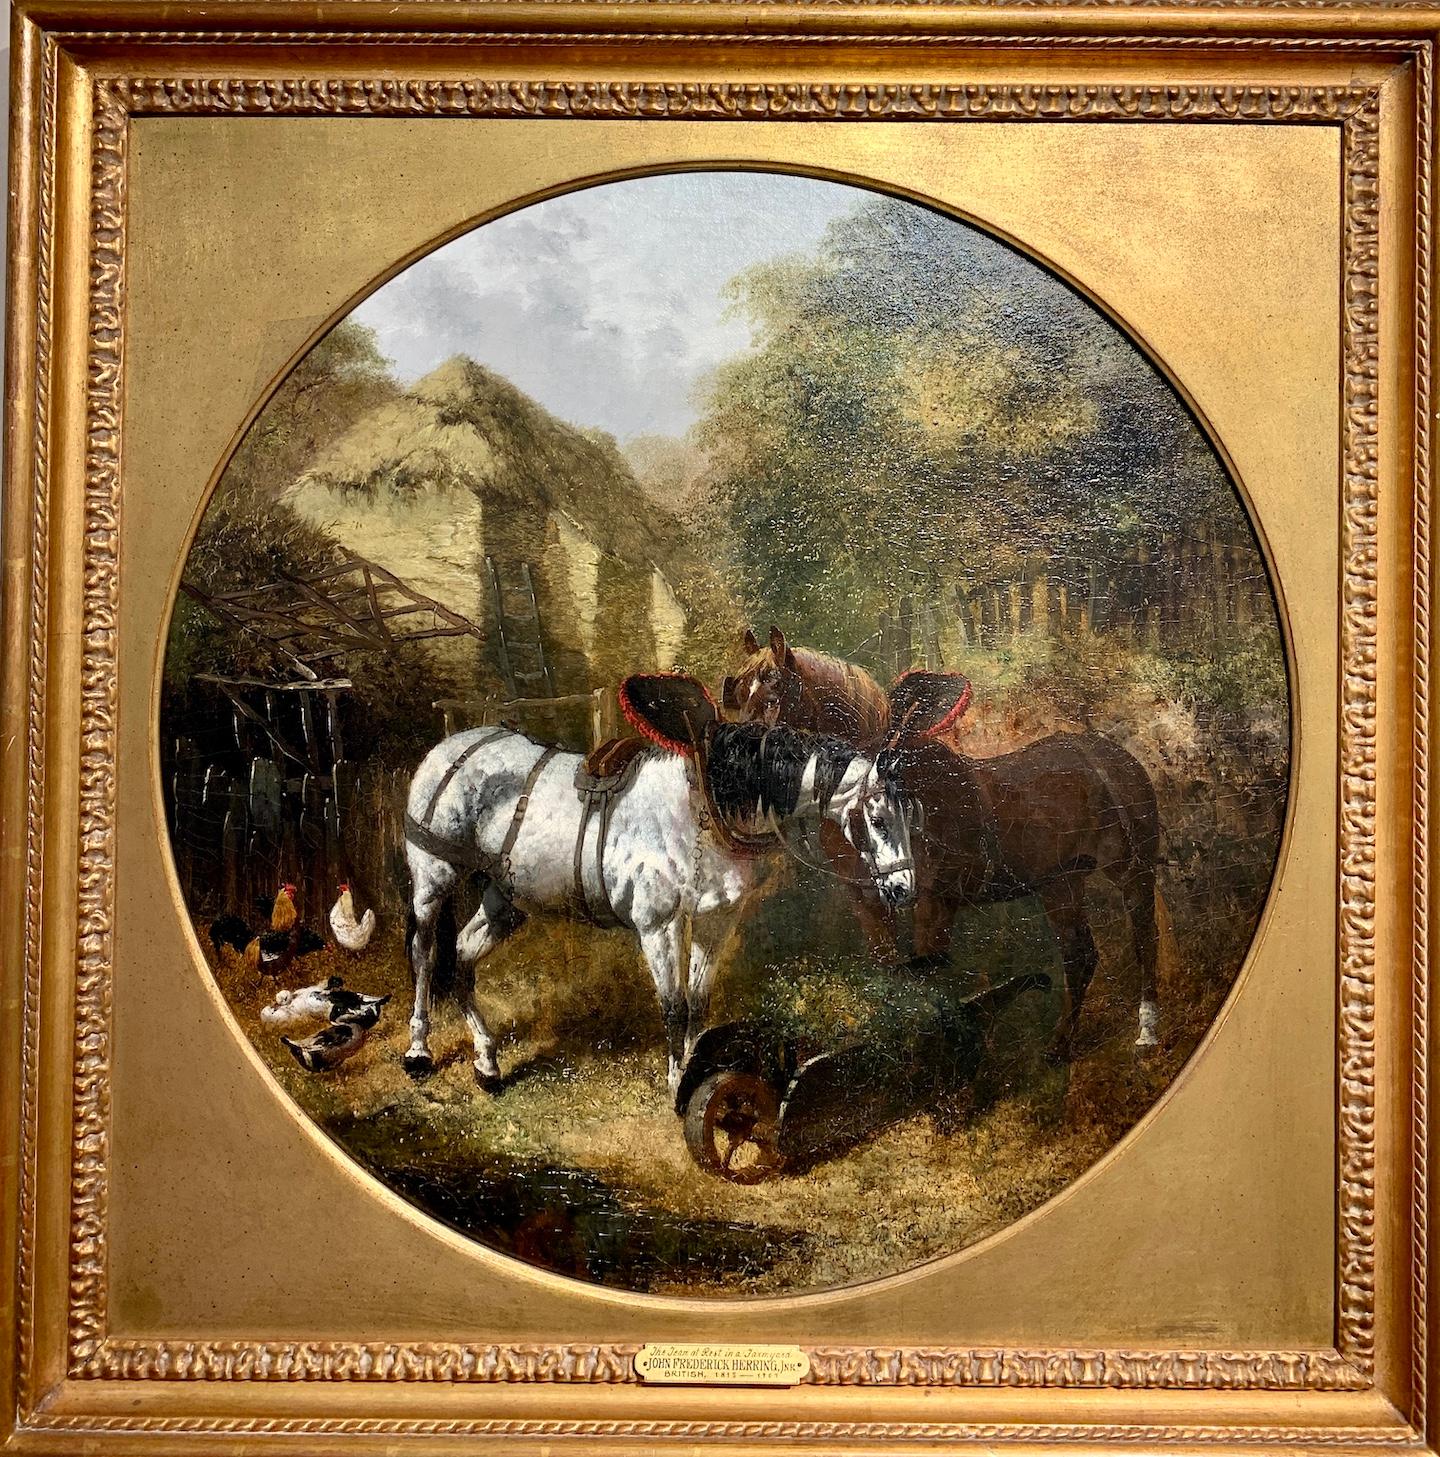 Antique 19th century English, Cart Horses in a farmyard landscape with cottage.